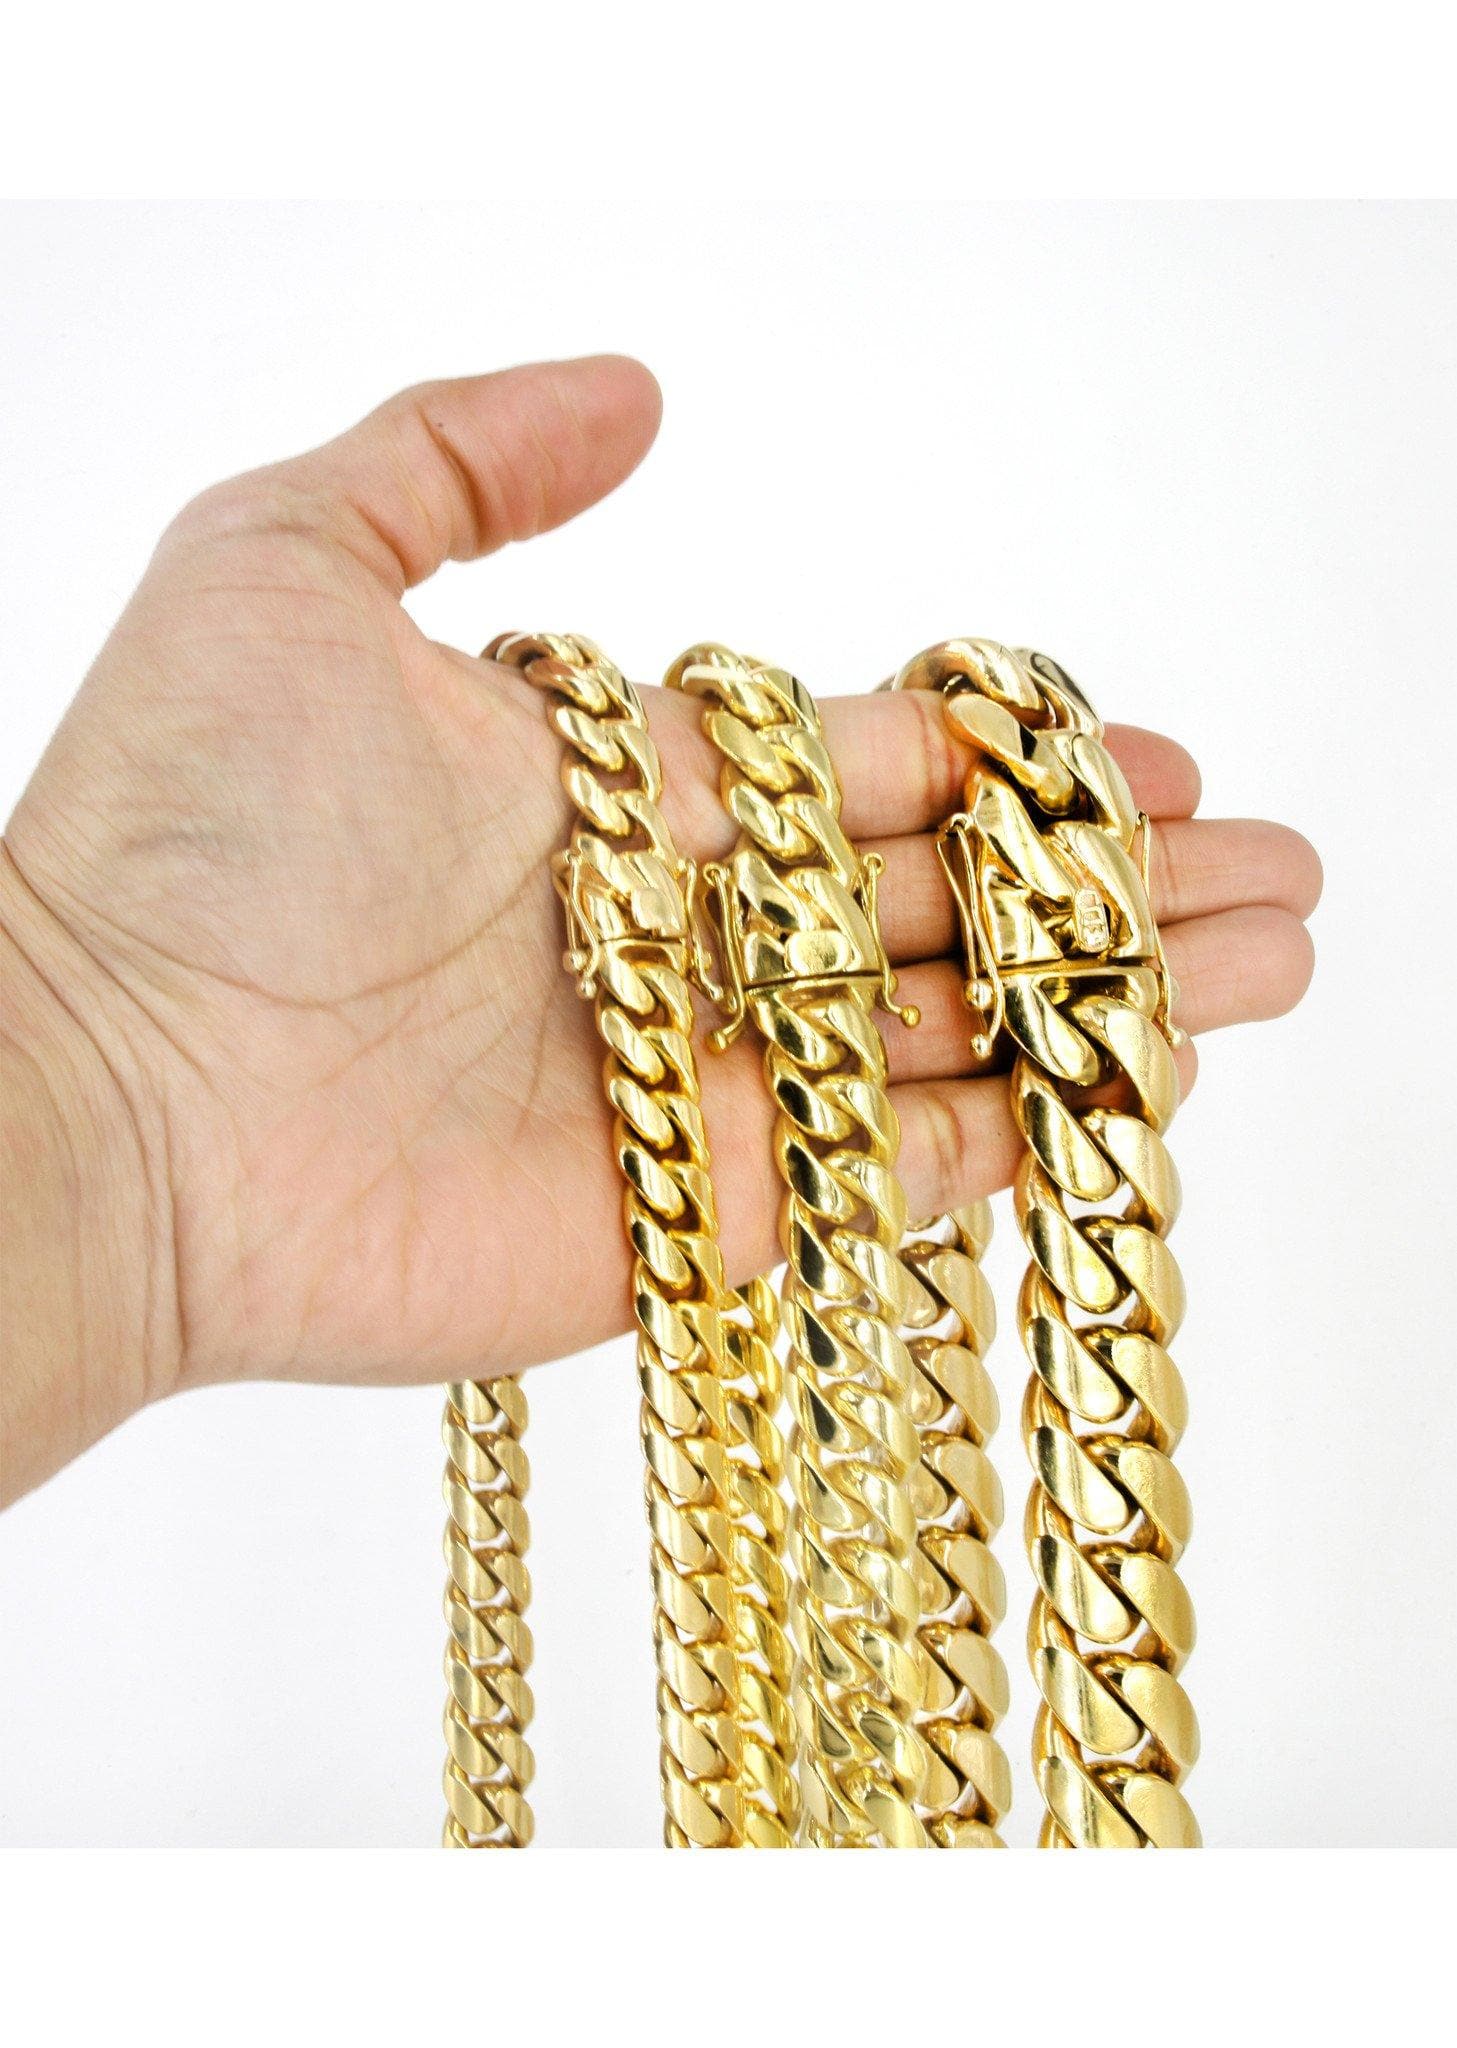 Gold Cuban Link Chain (13mm) - If & Co. 14K Yellow Gold / 20 inch